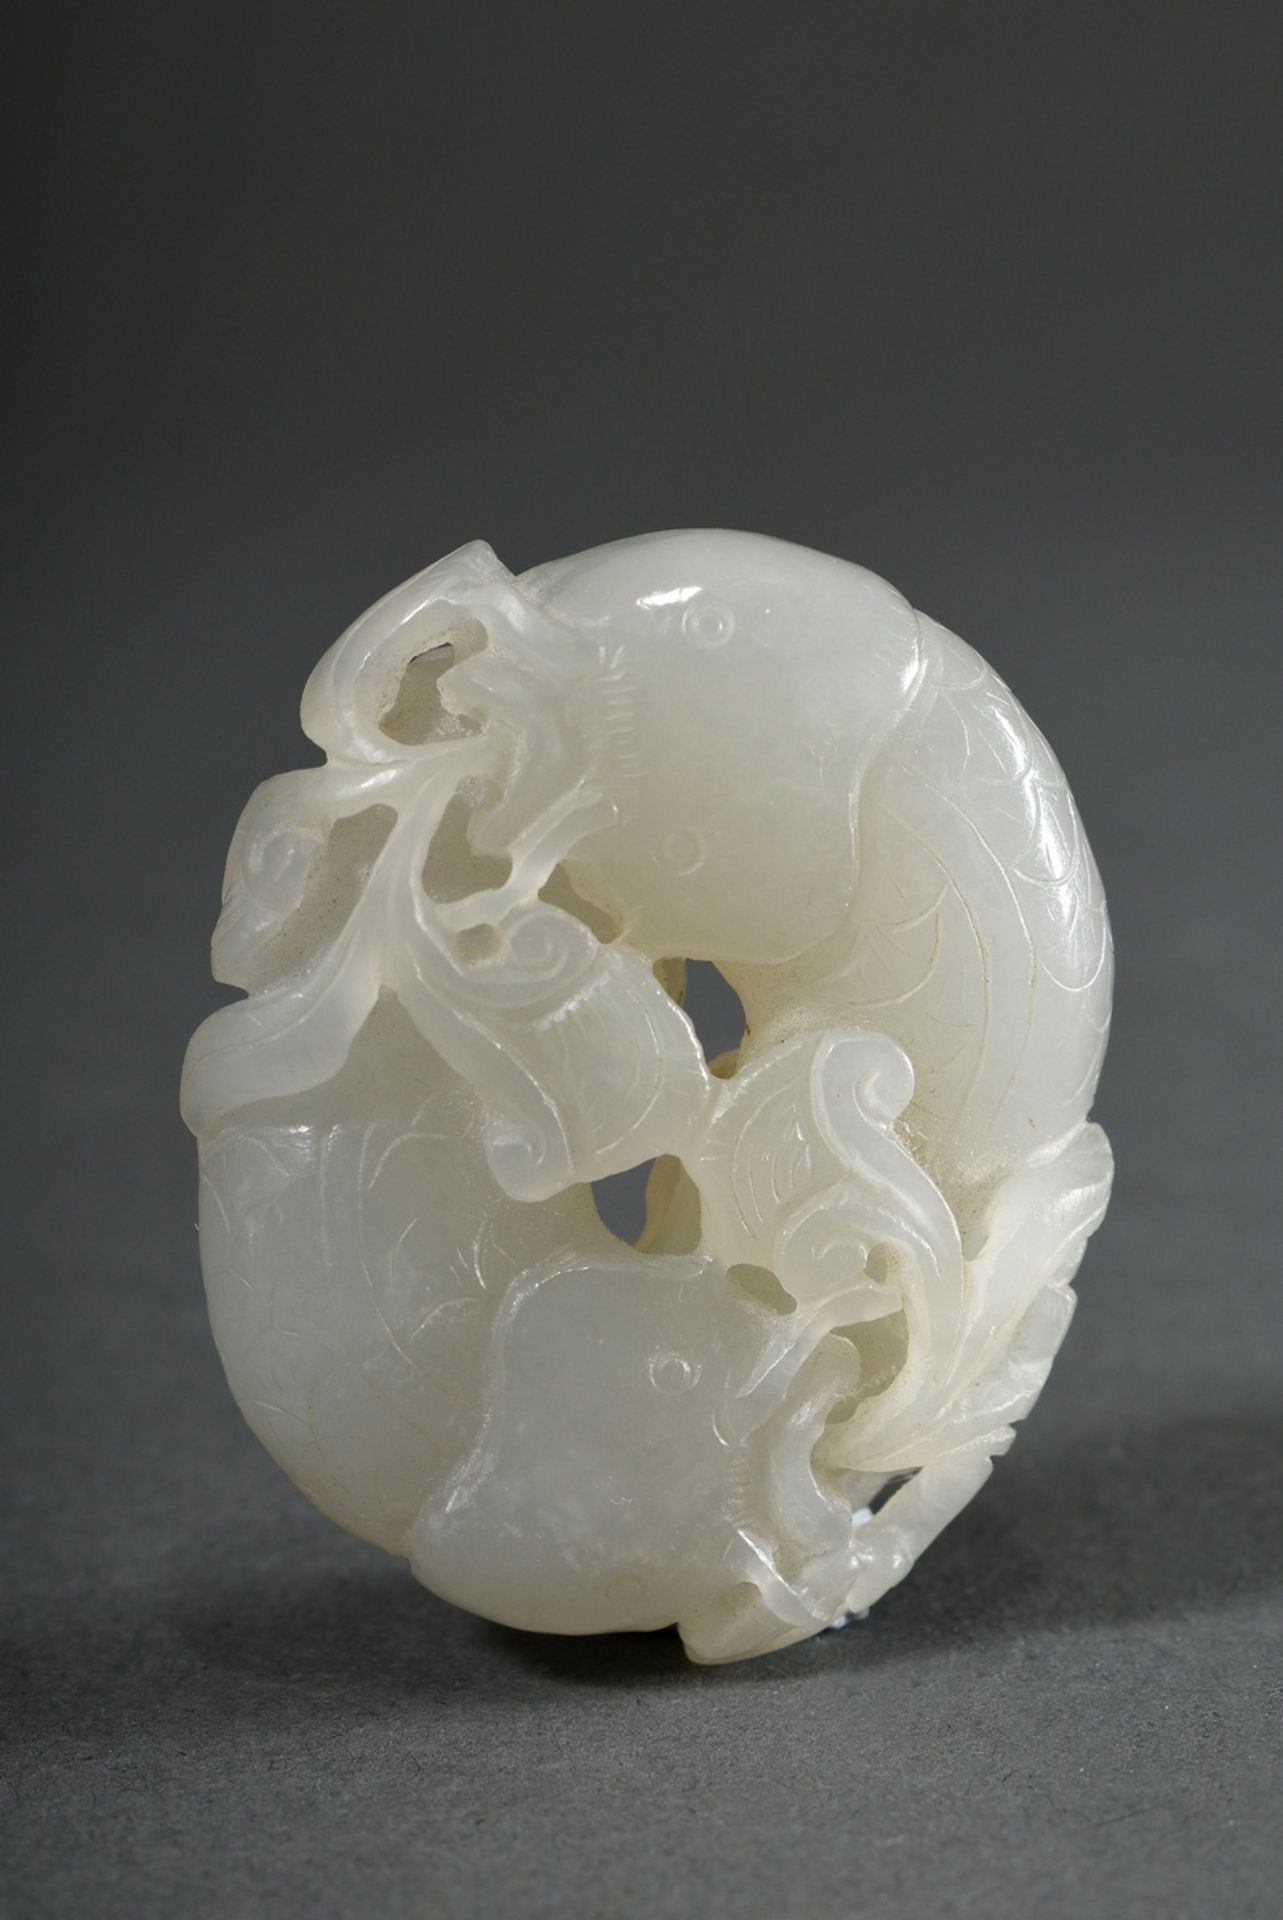 Fine light jade toggle "Two catfish and plants", China, Qing period, wooden stand, 5.3x4.2x1.5cm - Image 4 of 4